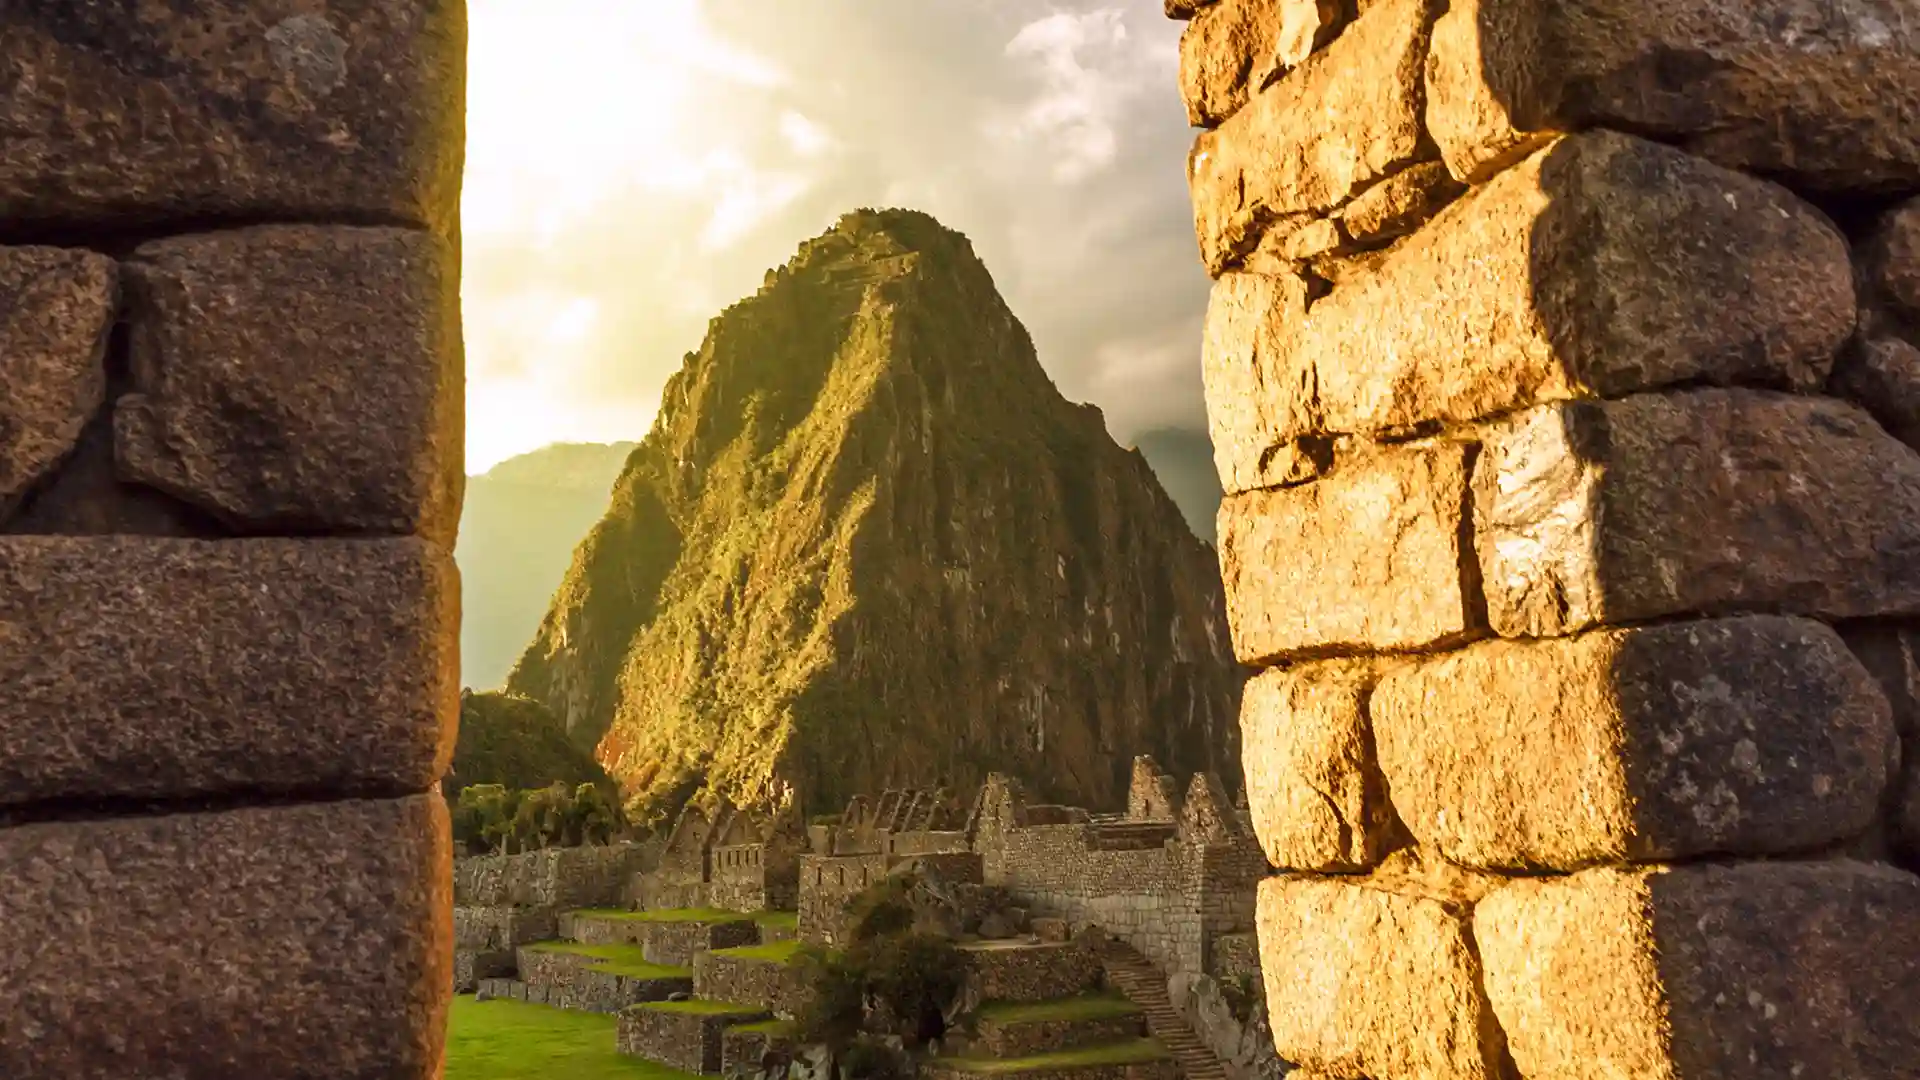 View of Machu Picchu, an ancient citadel surrounded by a lush green landscape in South America.